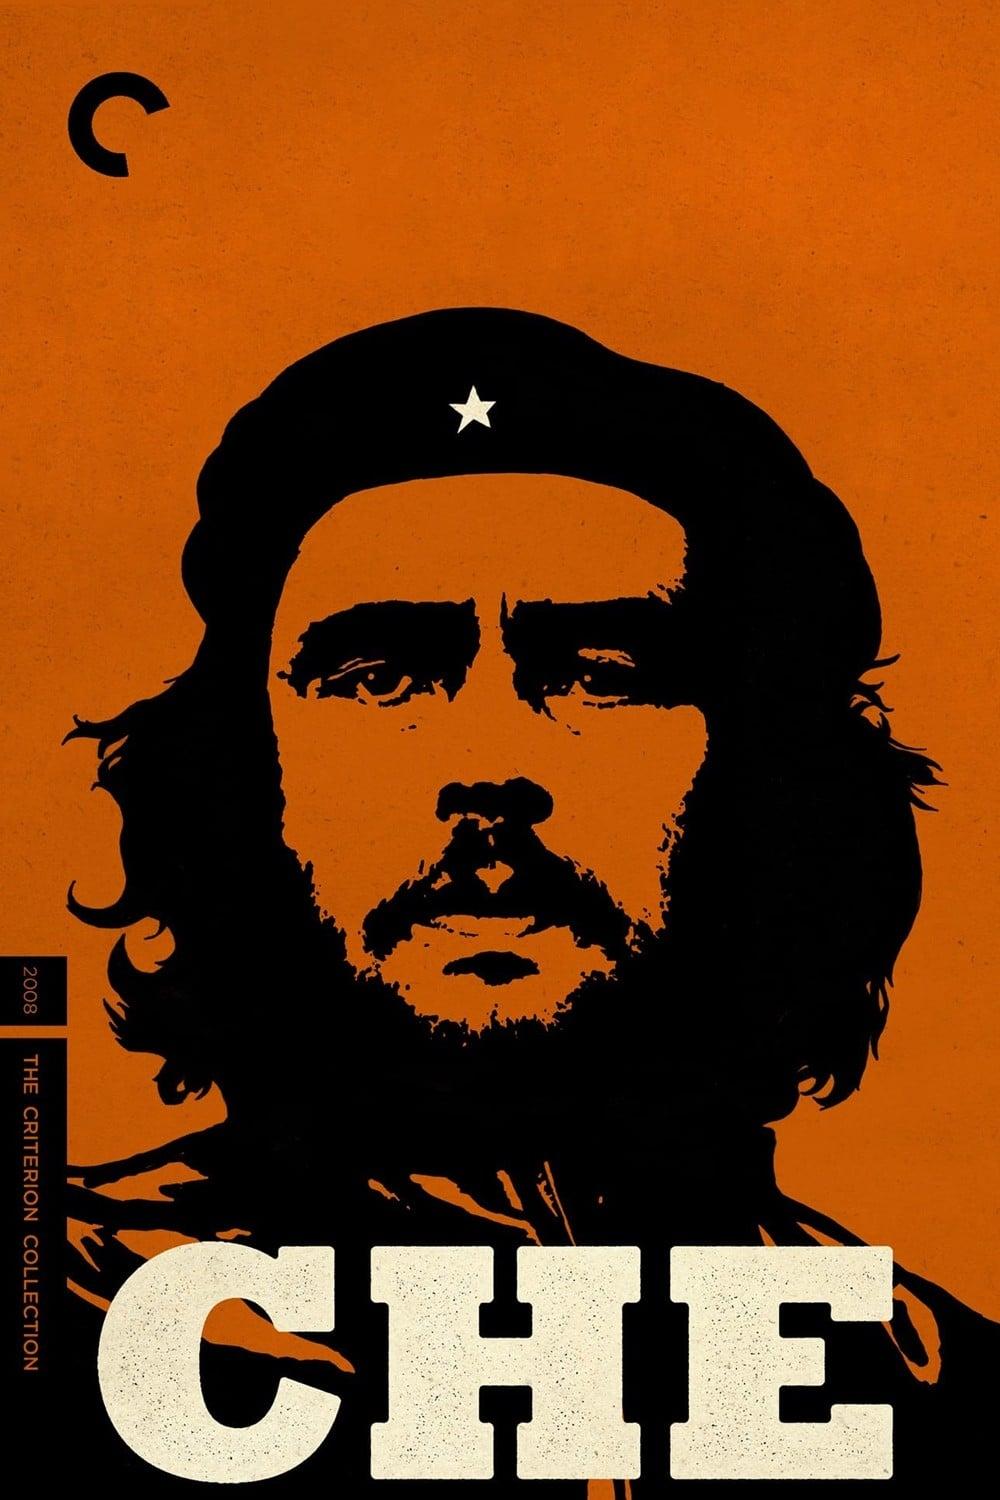 Che: Part One poster